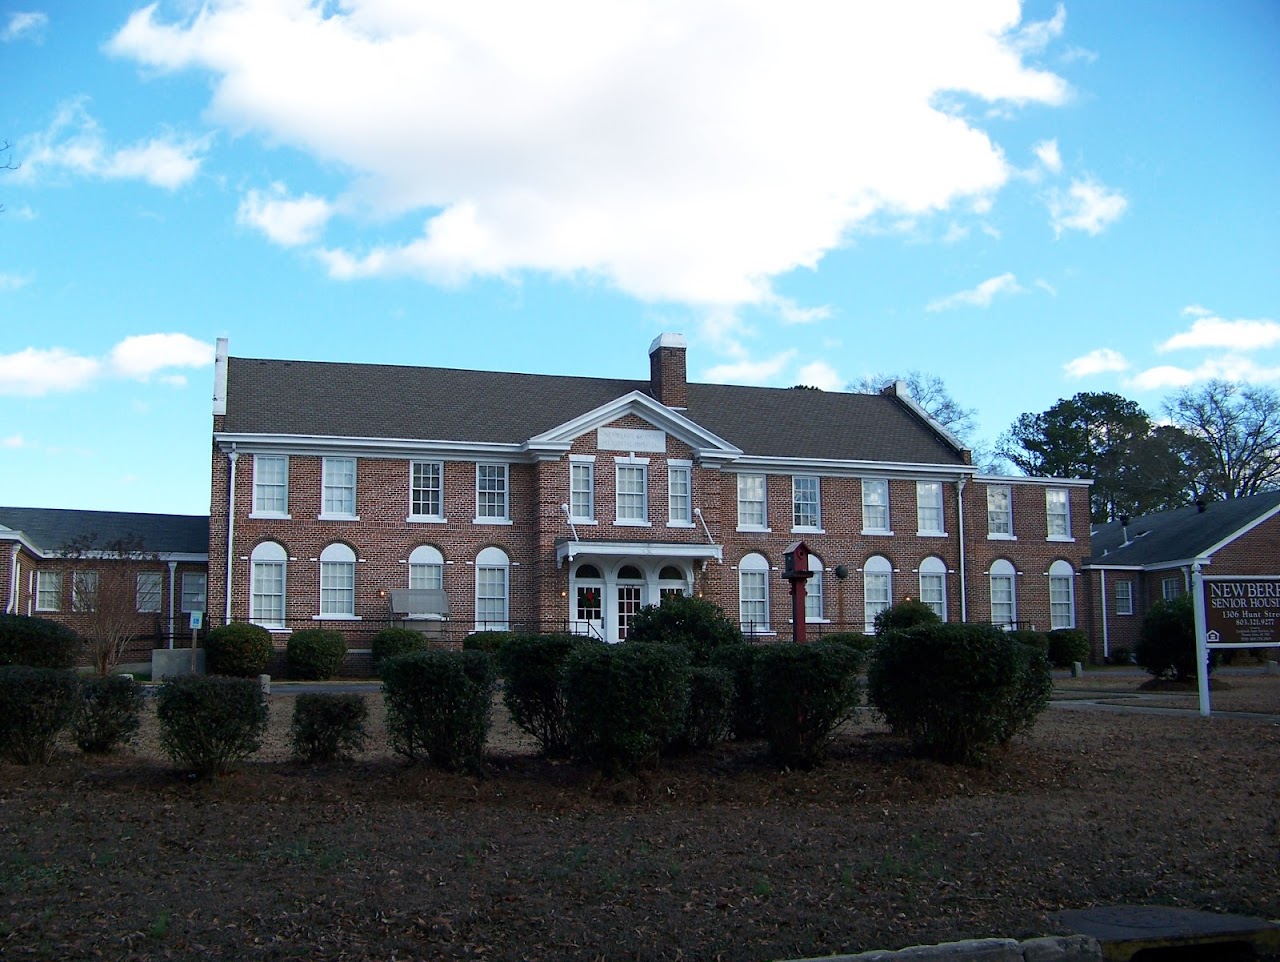 Photo of NEWBERRY SENIOR HOUSING. Affordable housing located at 1306 HUNT ST NEWBERRY, SC 29108